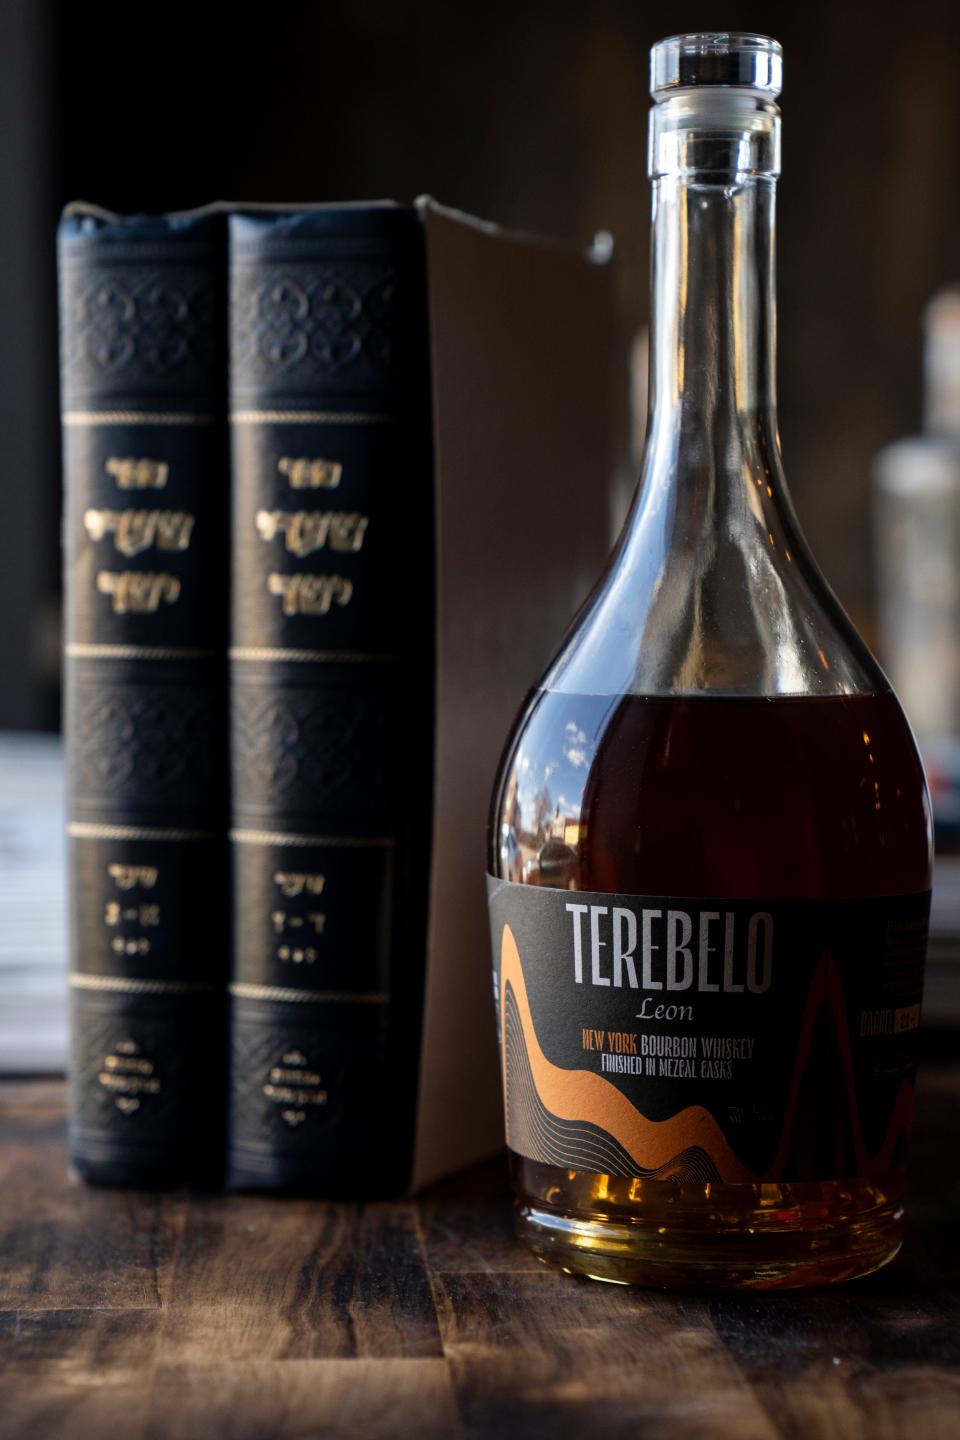 Mar 21, 2024; Passaic, N.J., United States; A bottle of Terebelo Leon bourbon whiskey is shown at ExquisiteSip Distillery. The distillery currently offers classes from spirit making to barrel building.